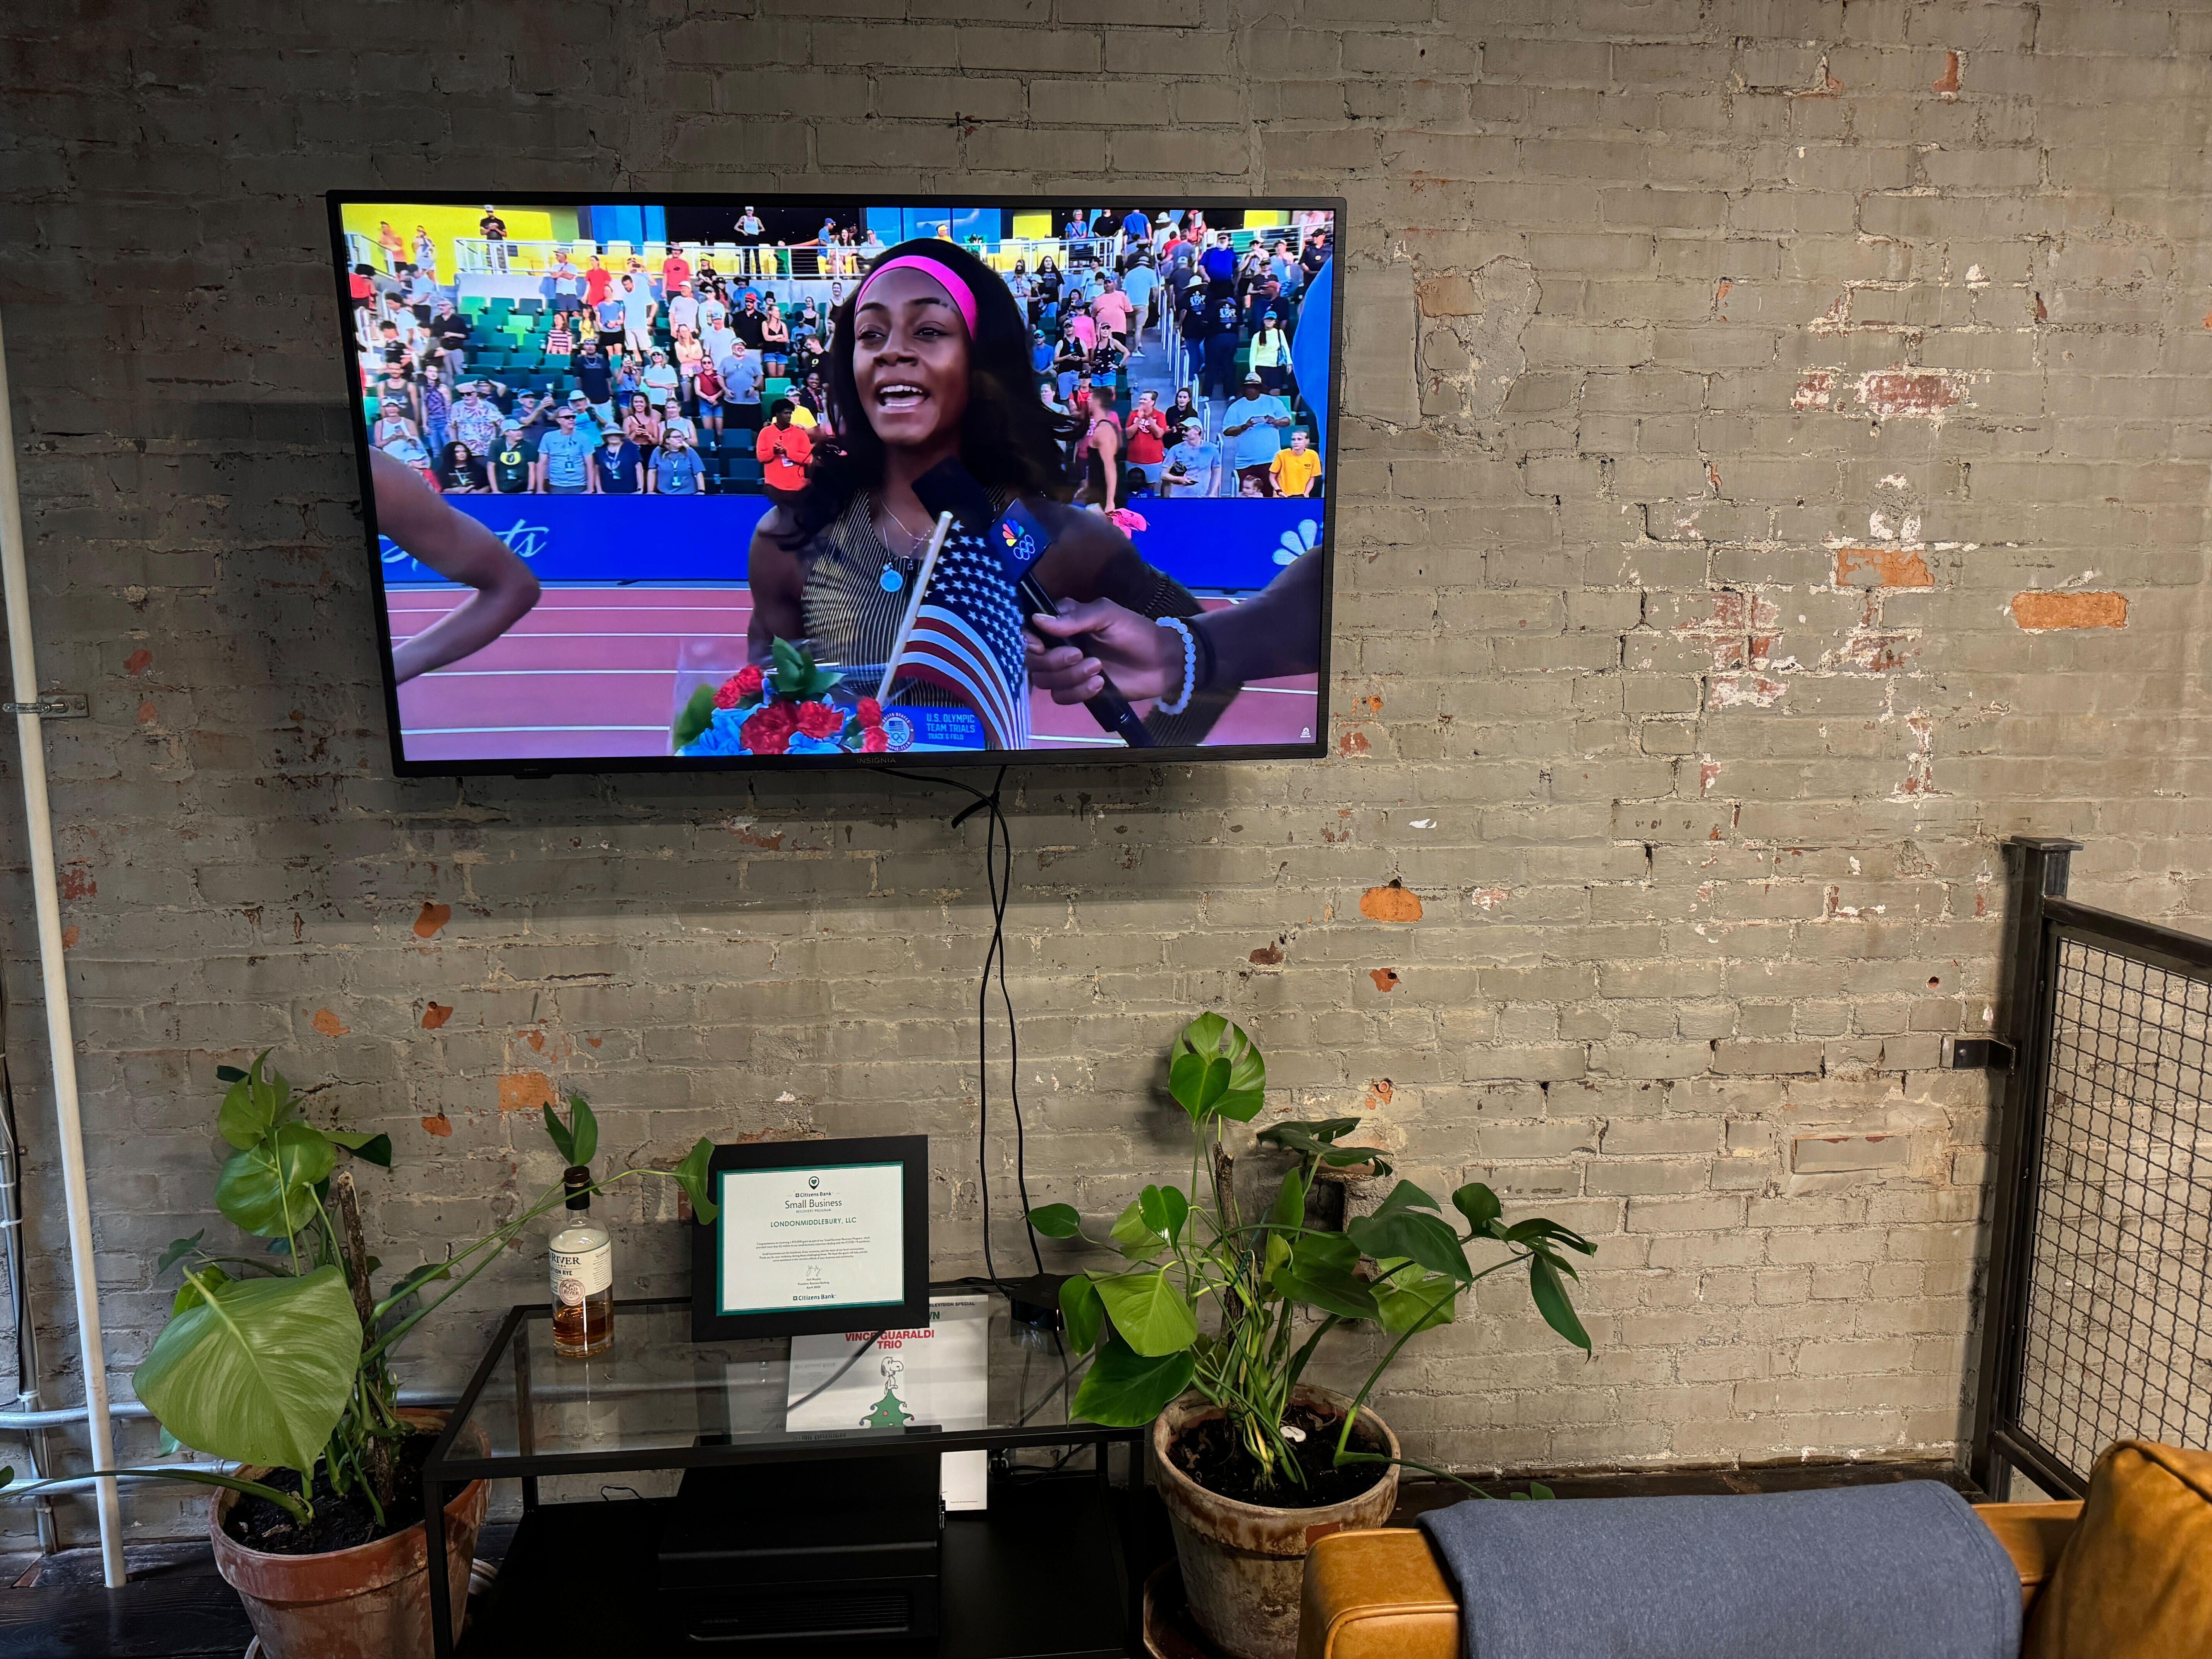 An Olympic event playing on the office TV.